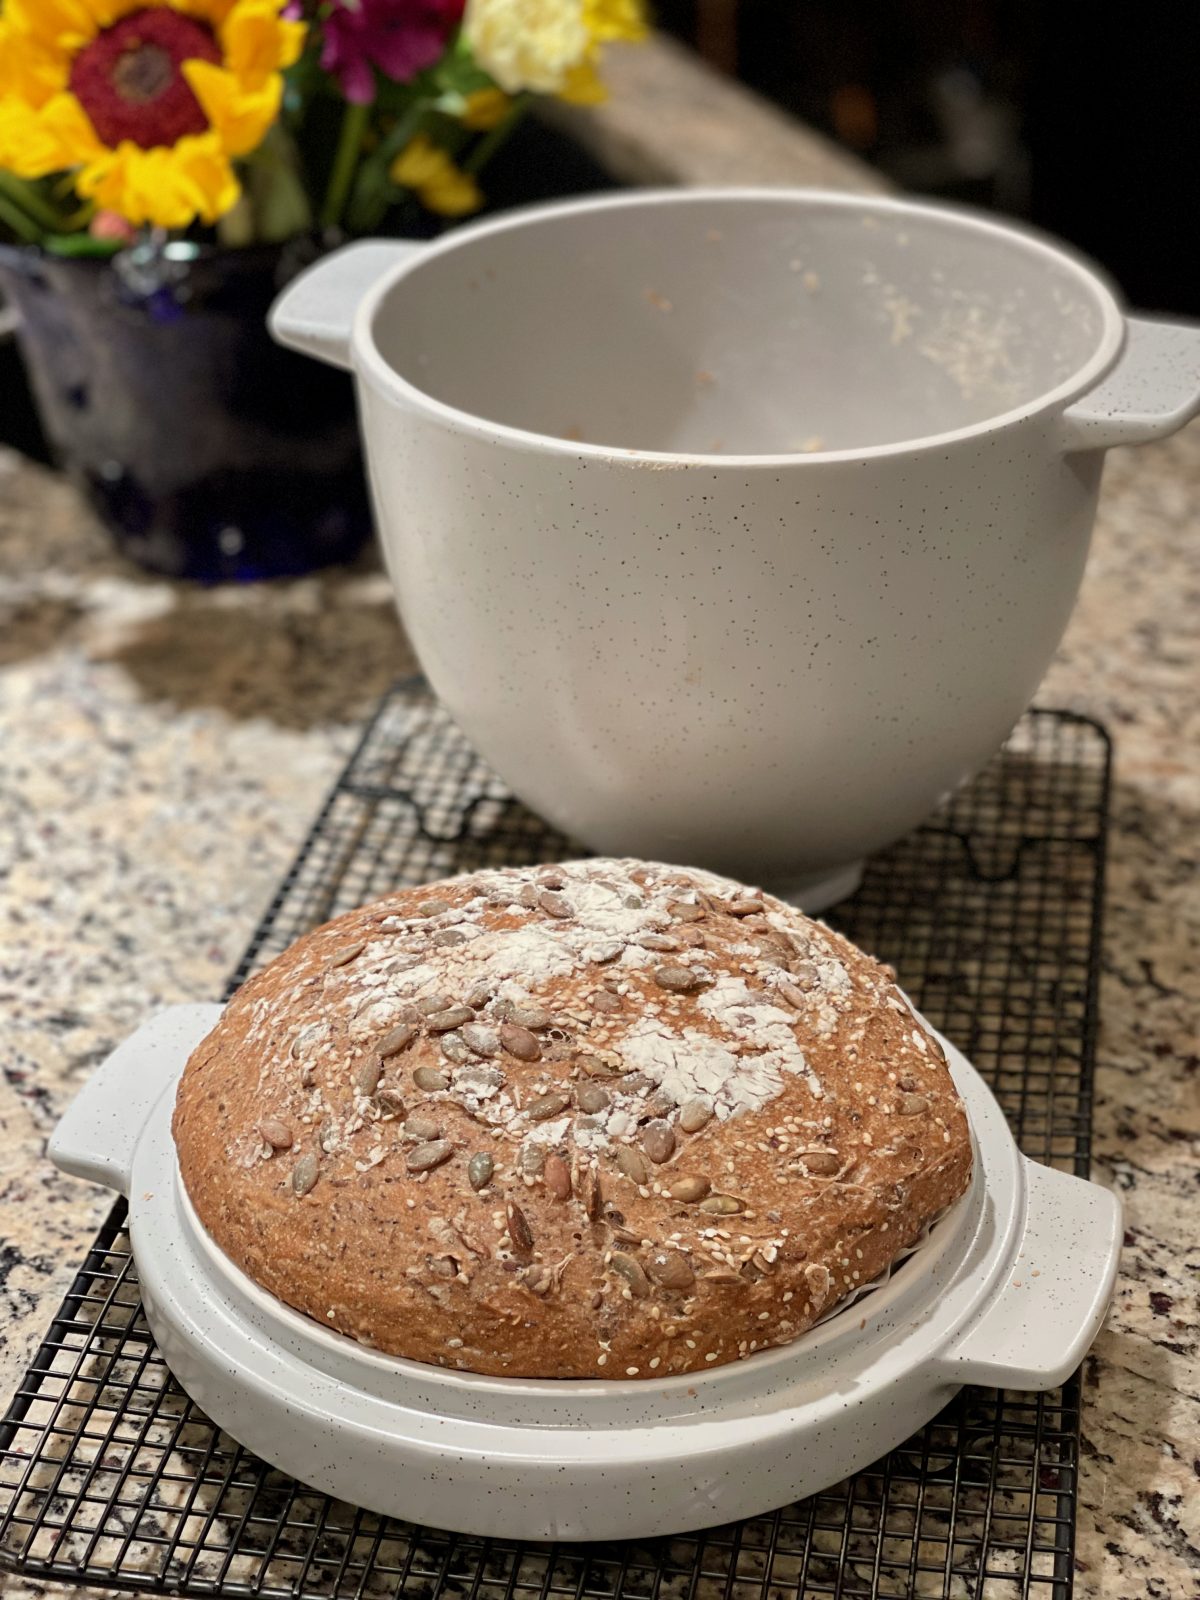 Crate and Barrel: GET IT HERE FIRST, KitchenAid Bread Bowl with Lid